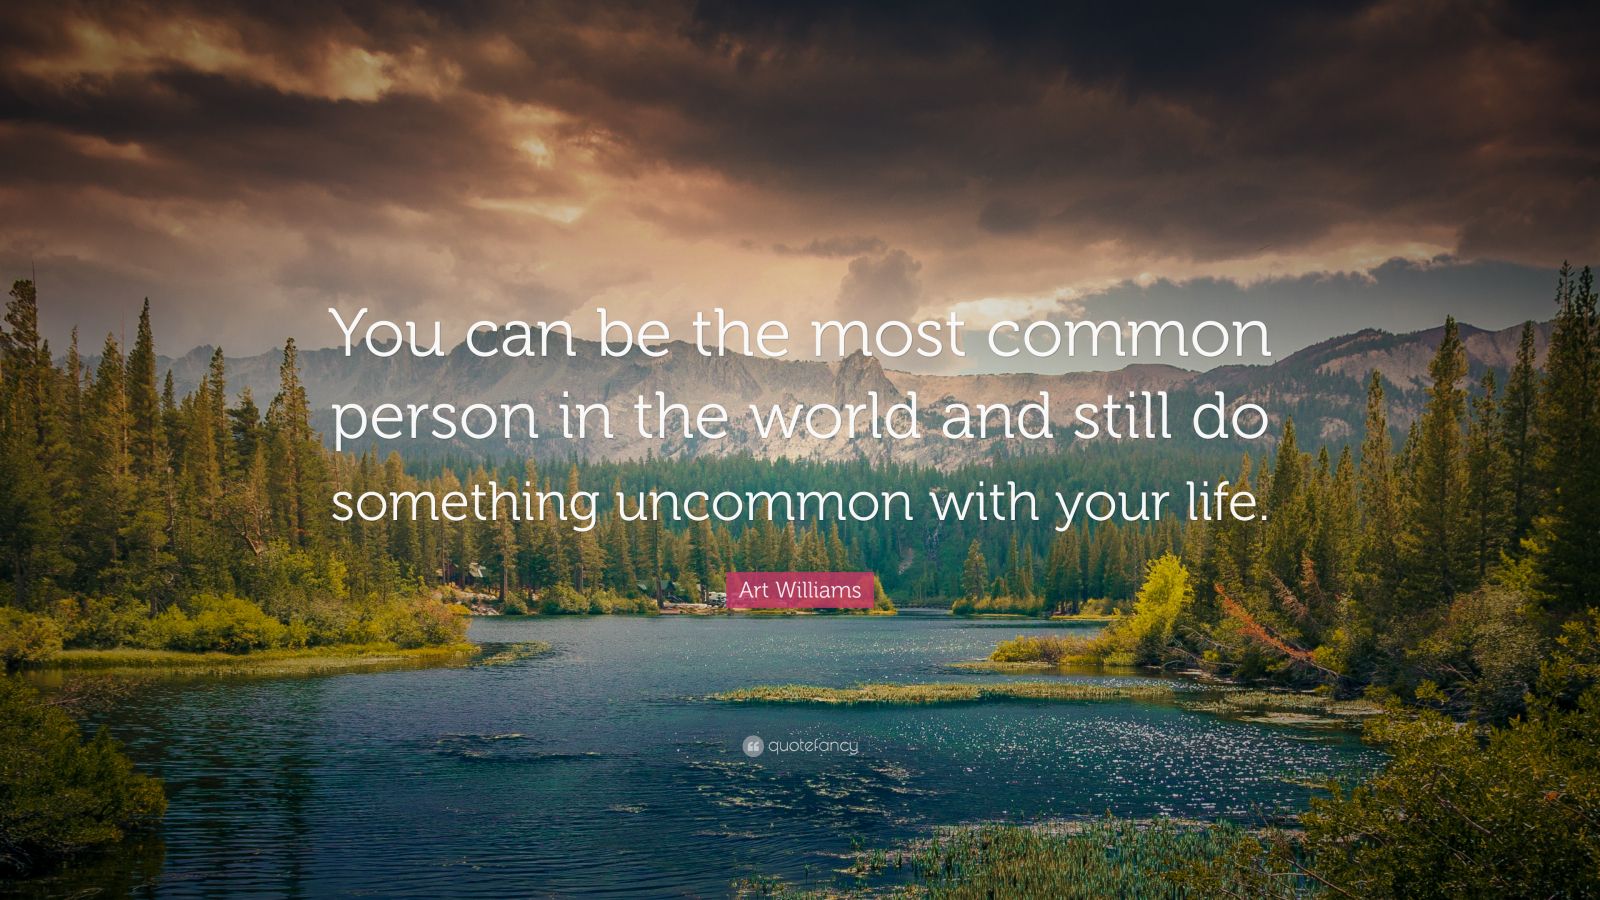 7159827 Art Williams Quote You Can Be The Most Common Person In The World 